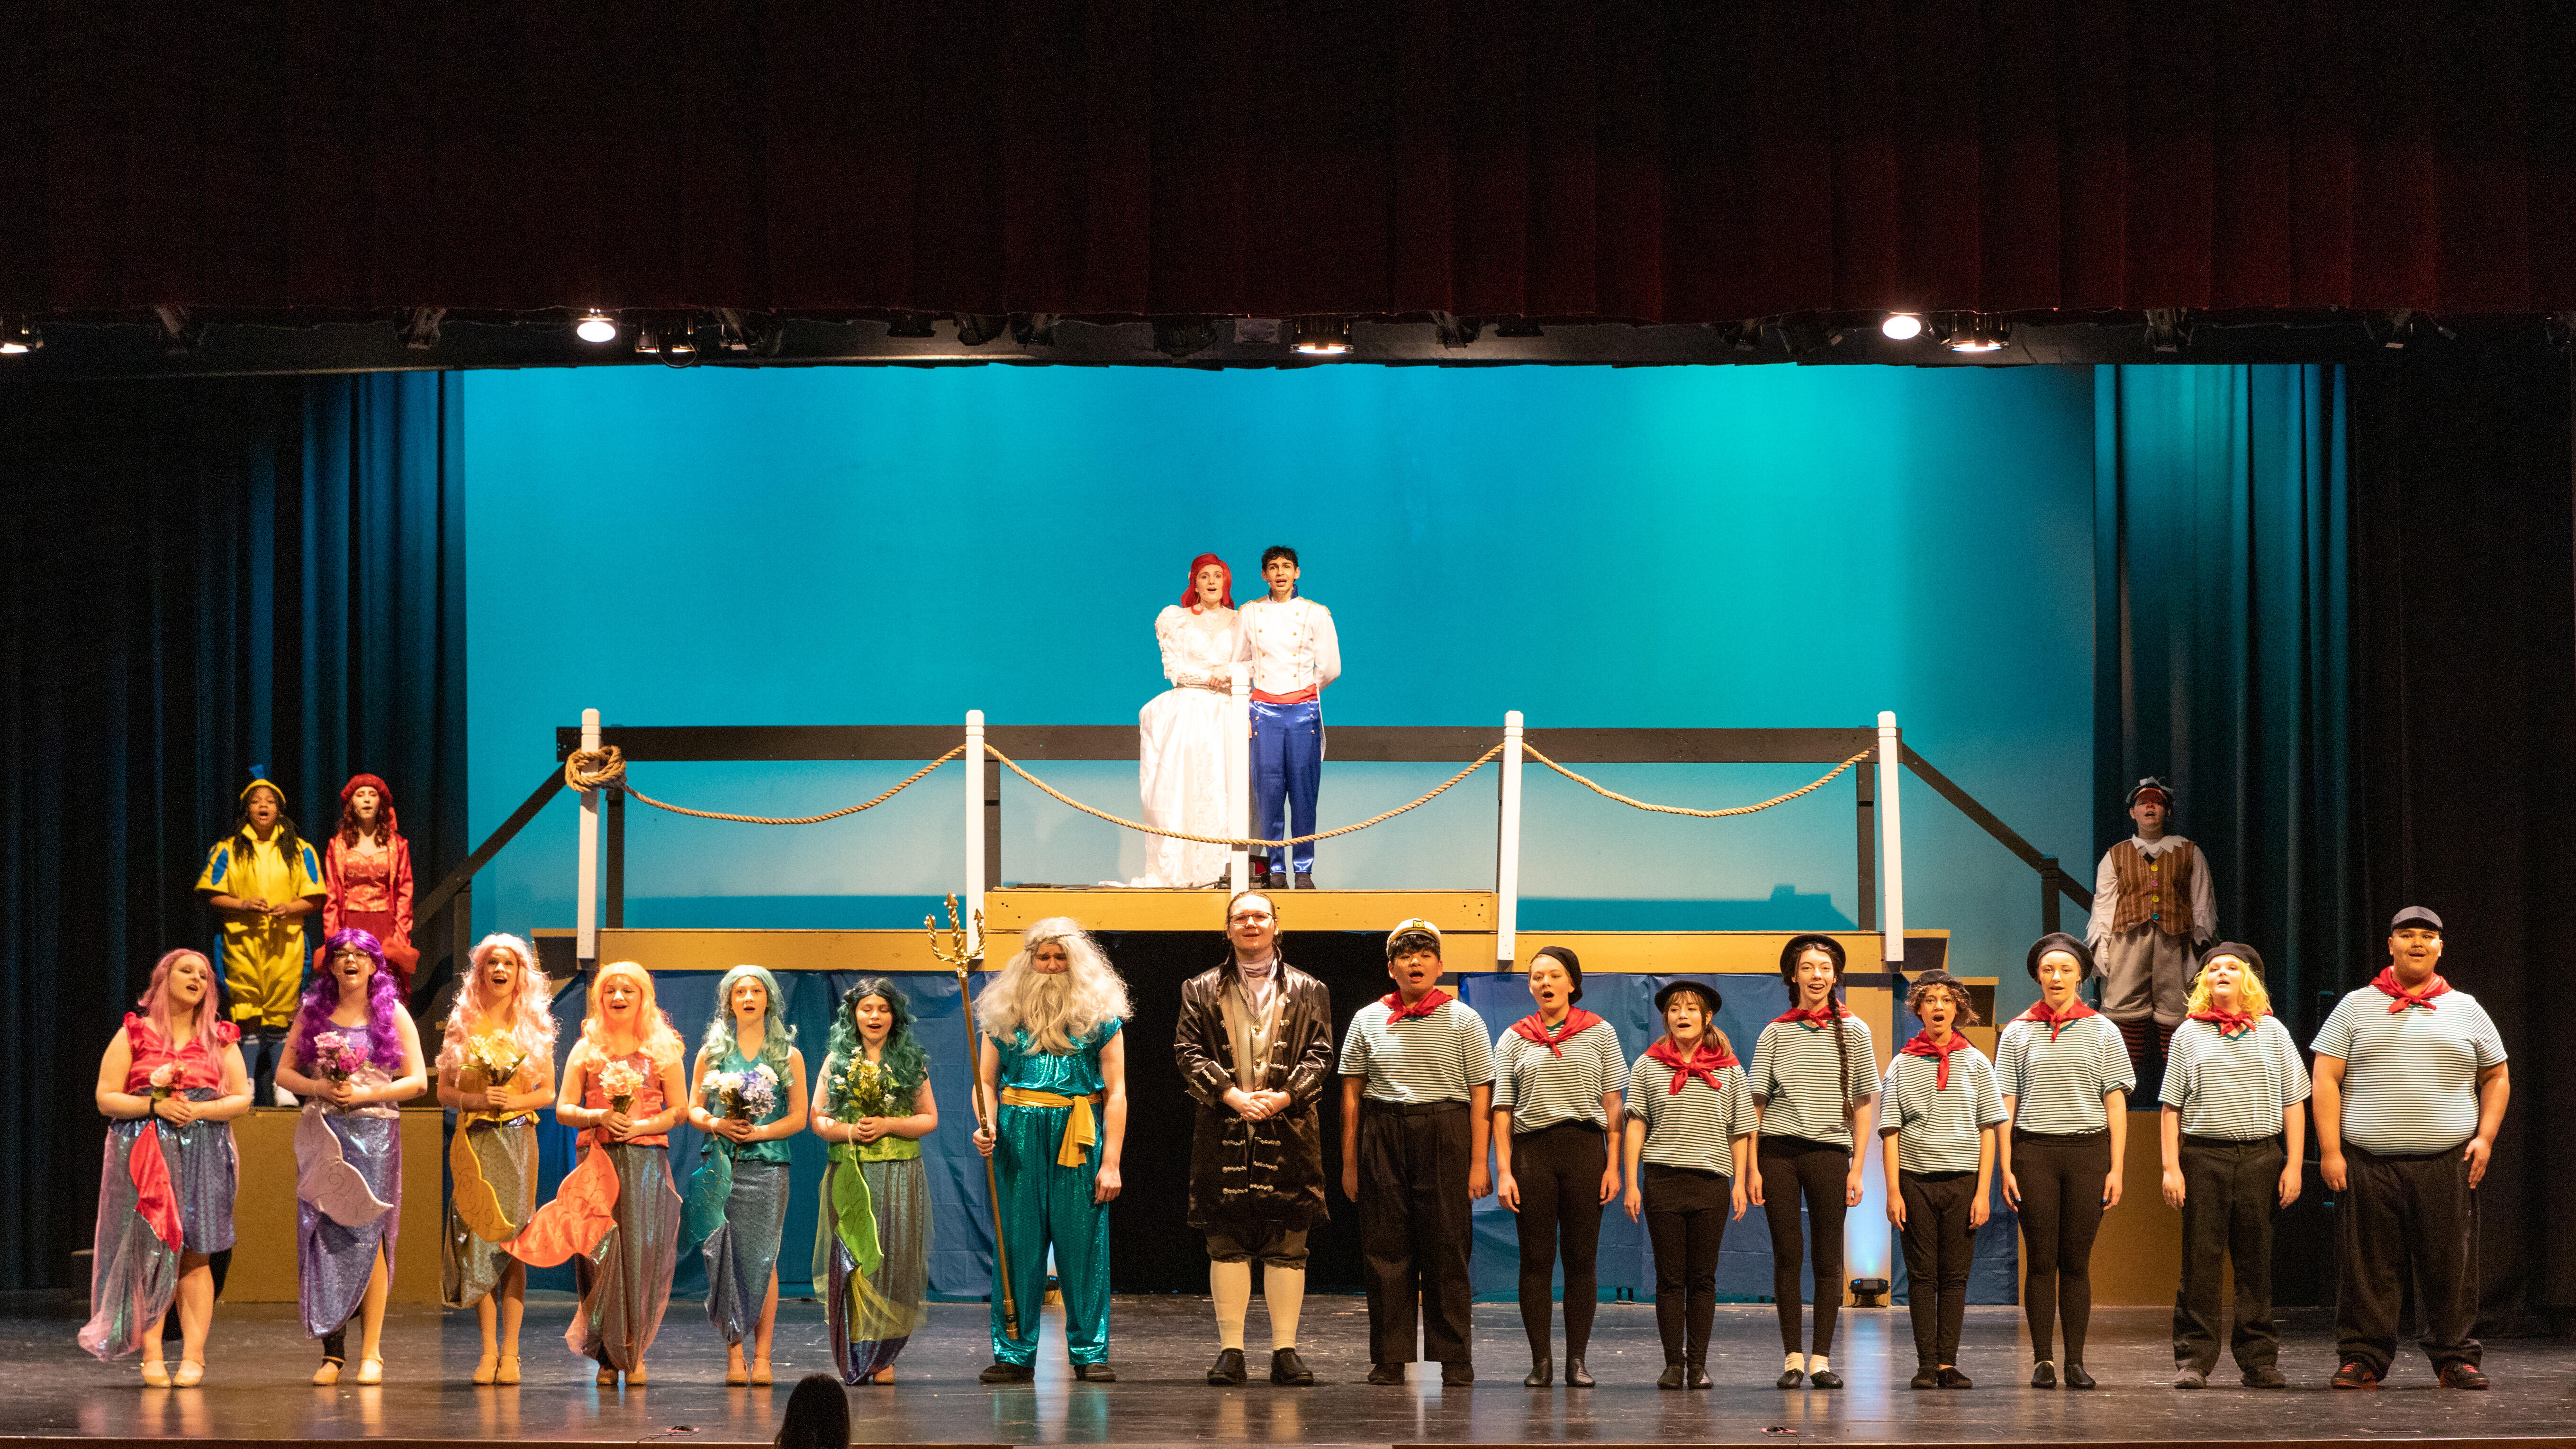 SV Drama Brings Guests "Under the Sea" with performance of "The Little Mermaid"